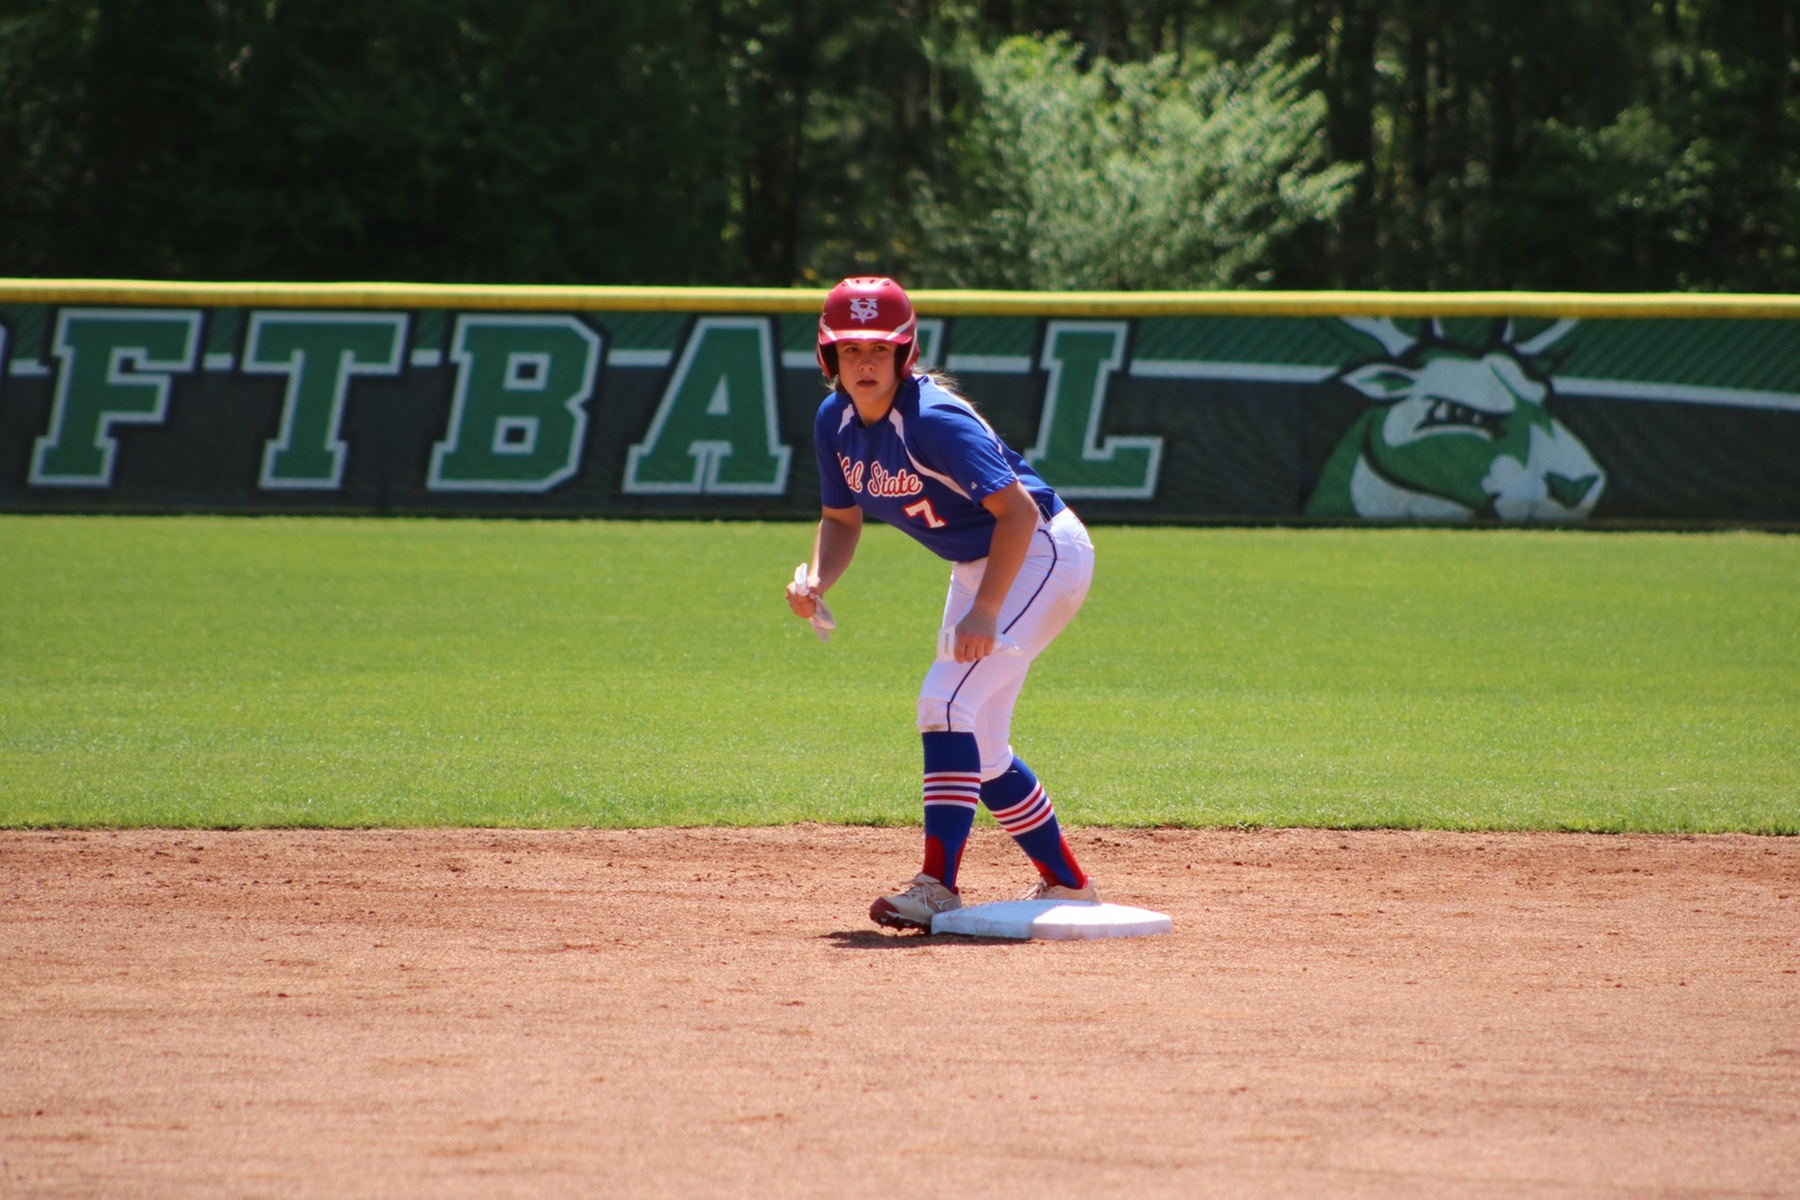 Alex McFarlin #7 leading off of second base during the conference series at Motlow State Community College.